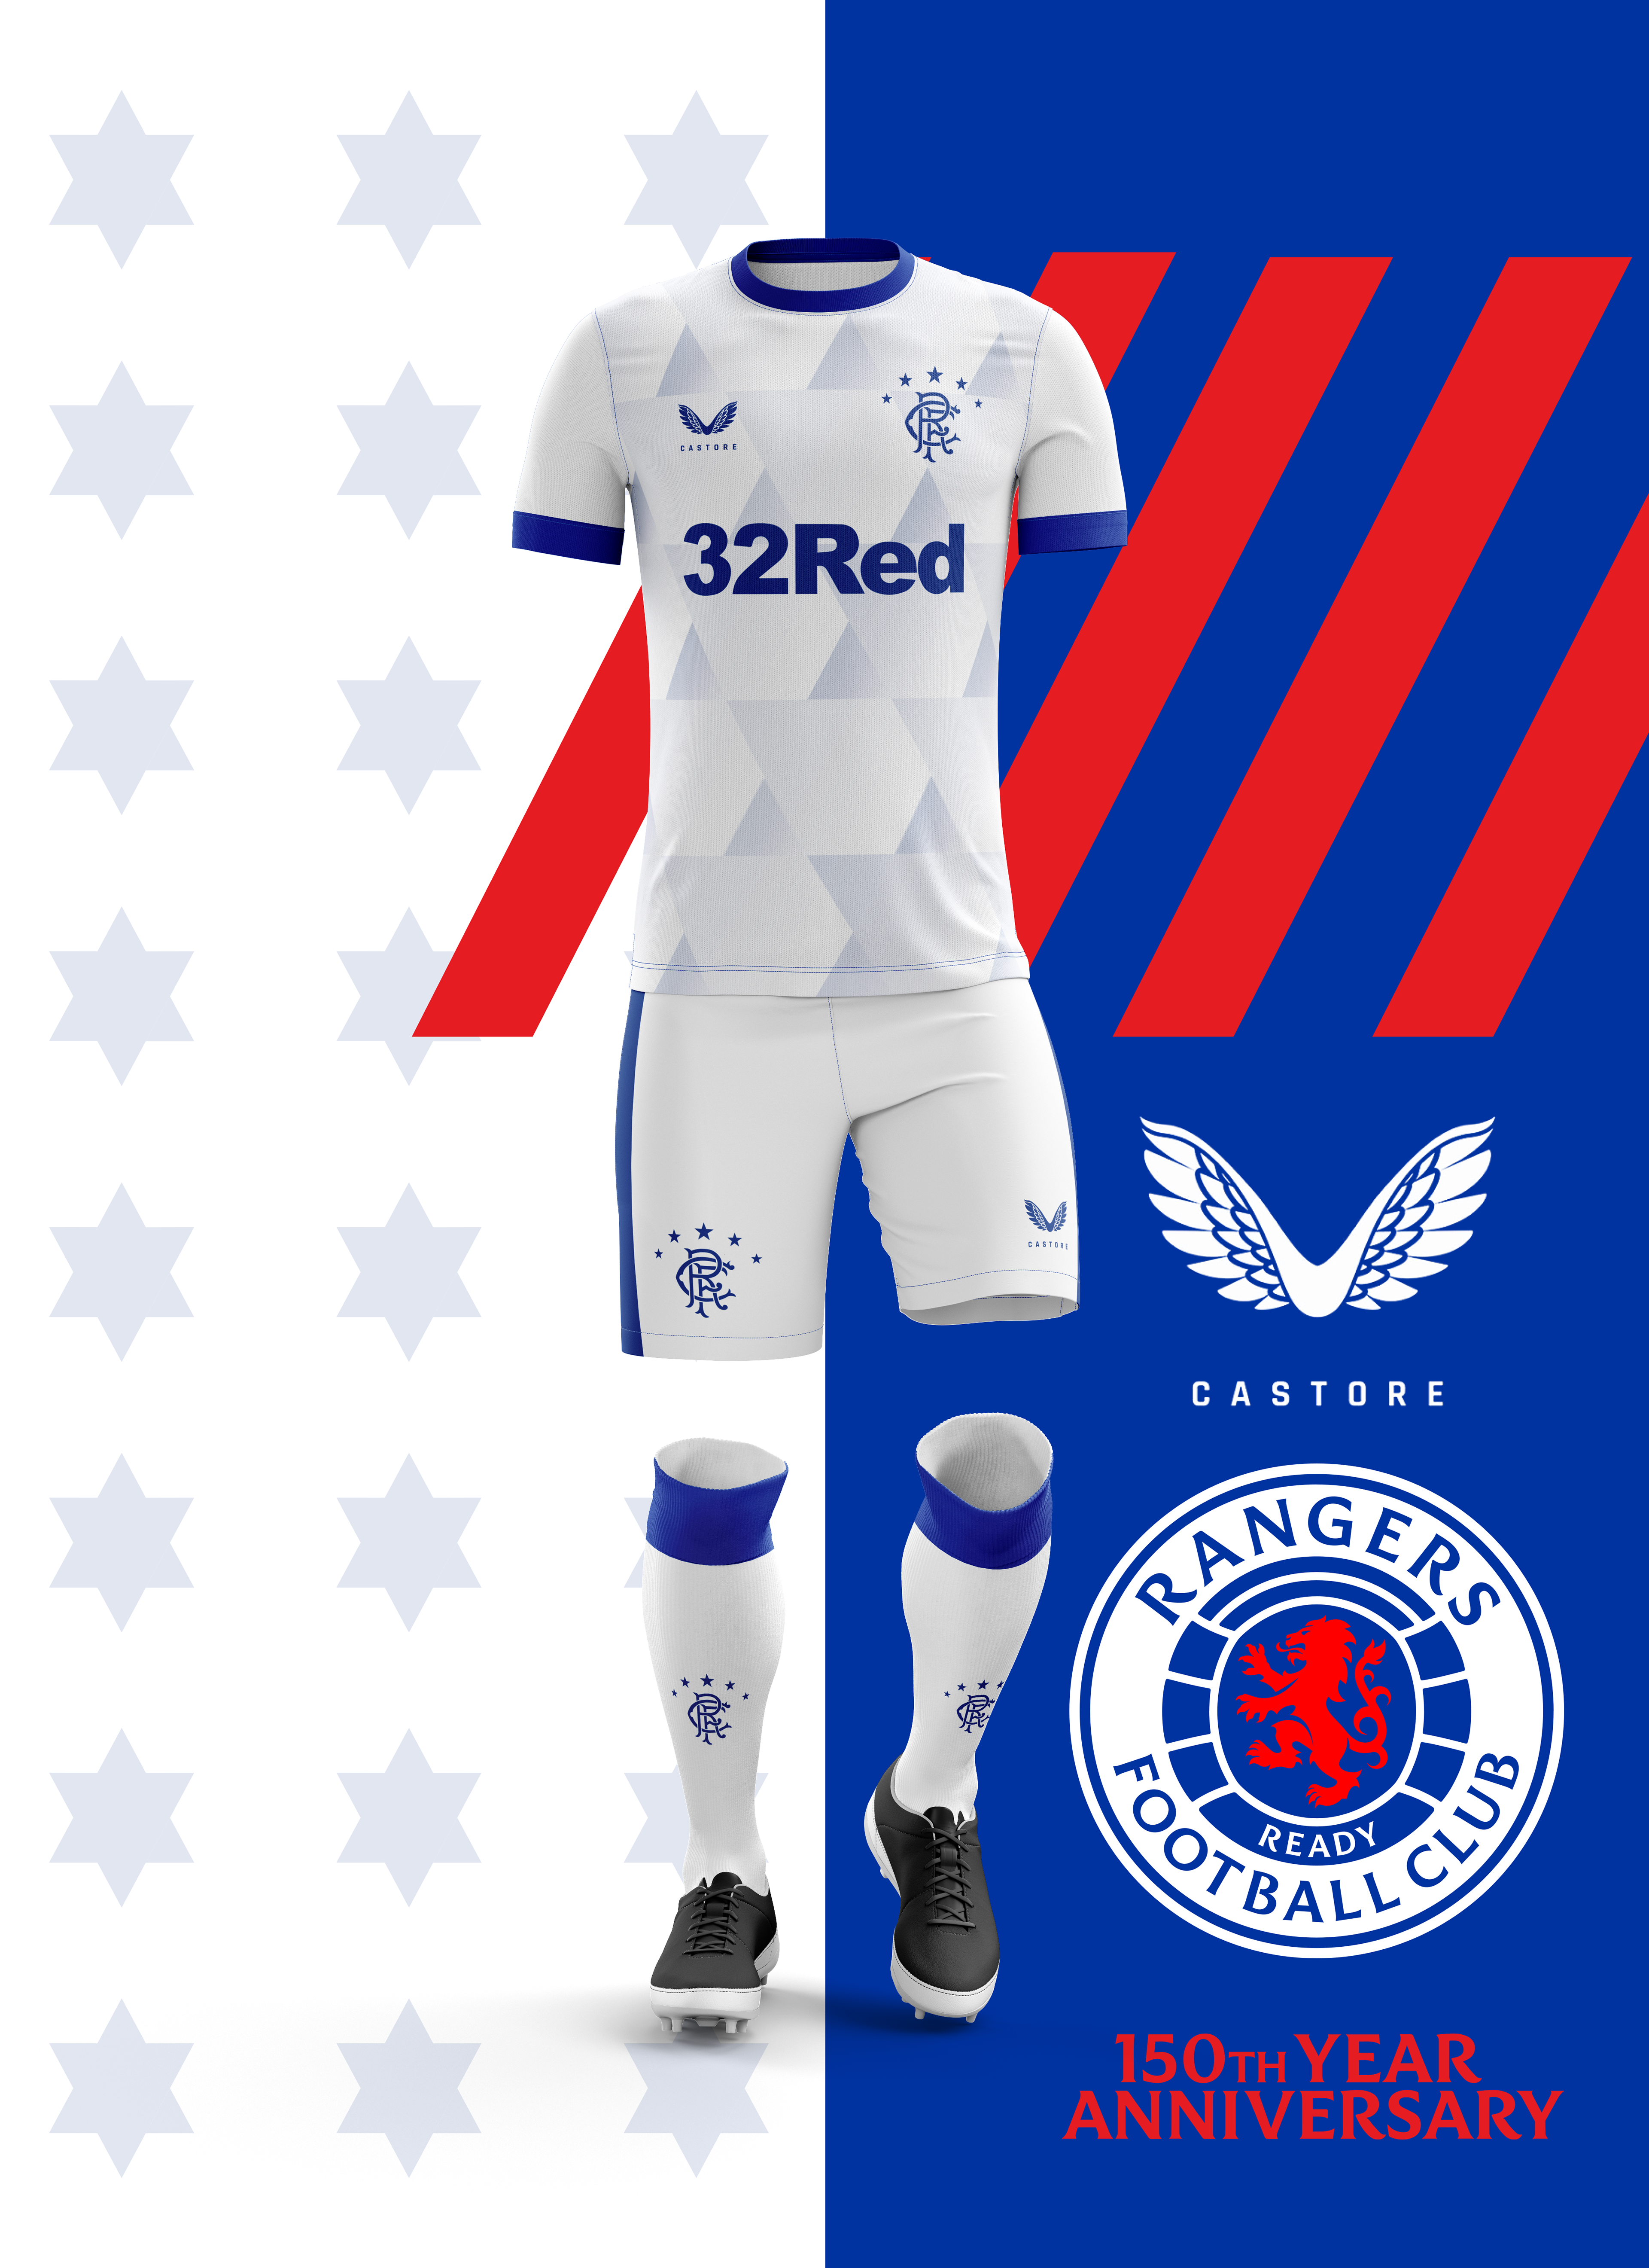 Rangers FC Mark 150th Anniversary with “Gallant Pioneers” Kit